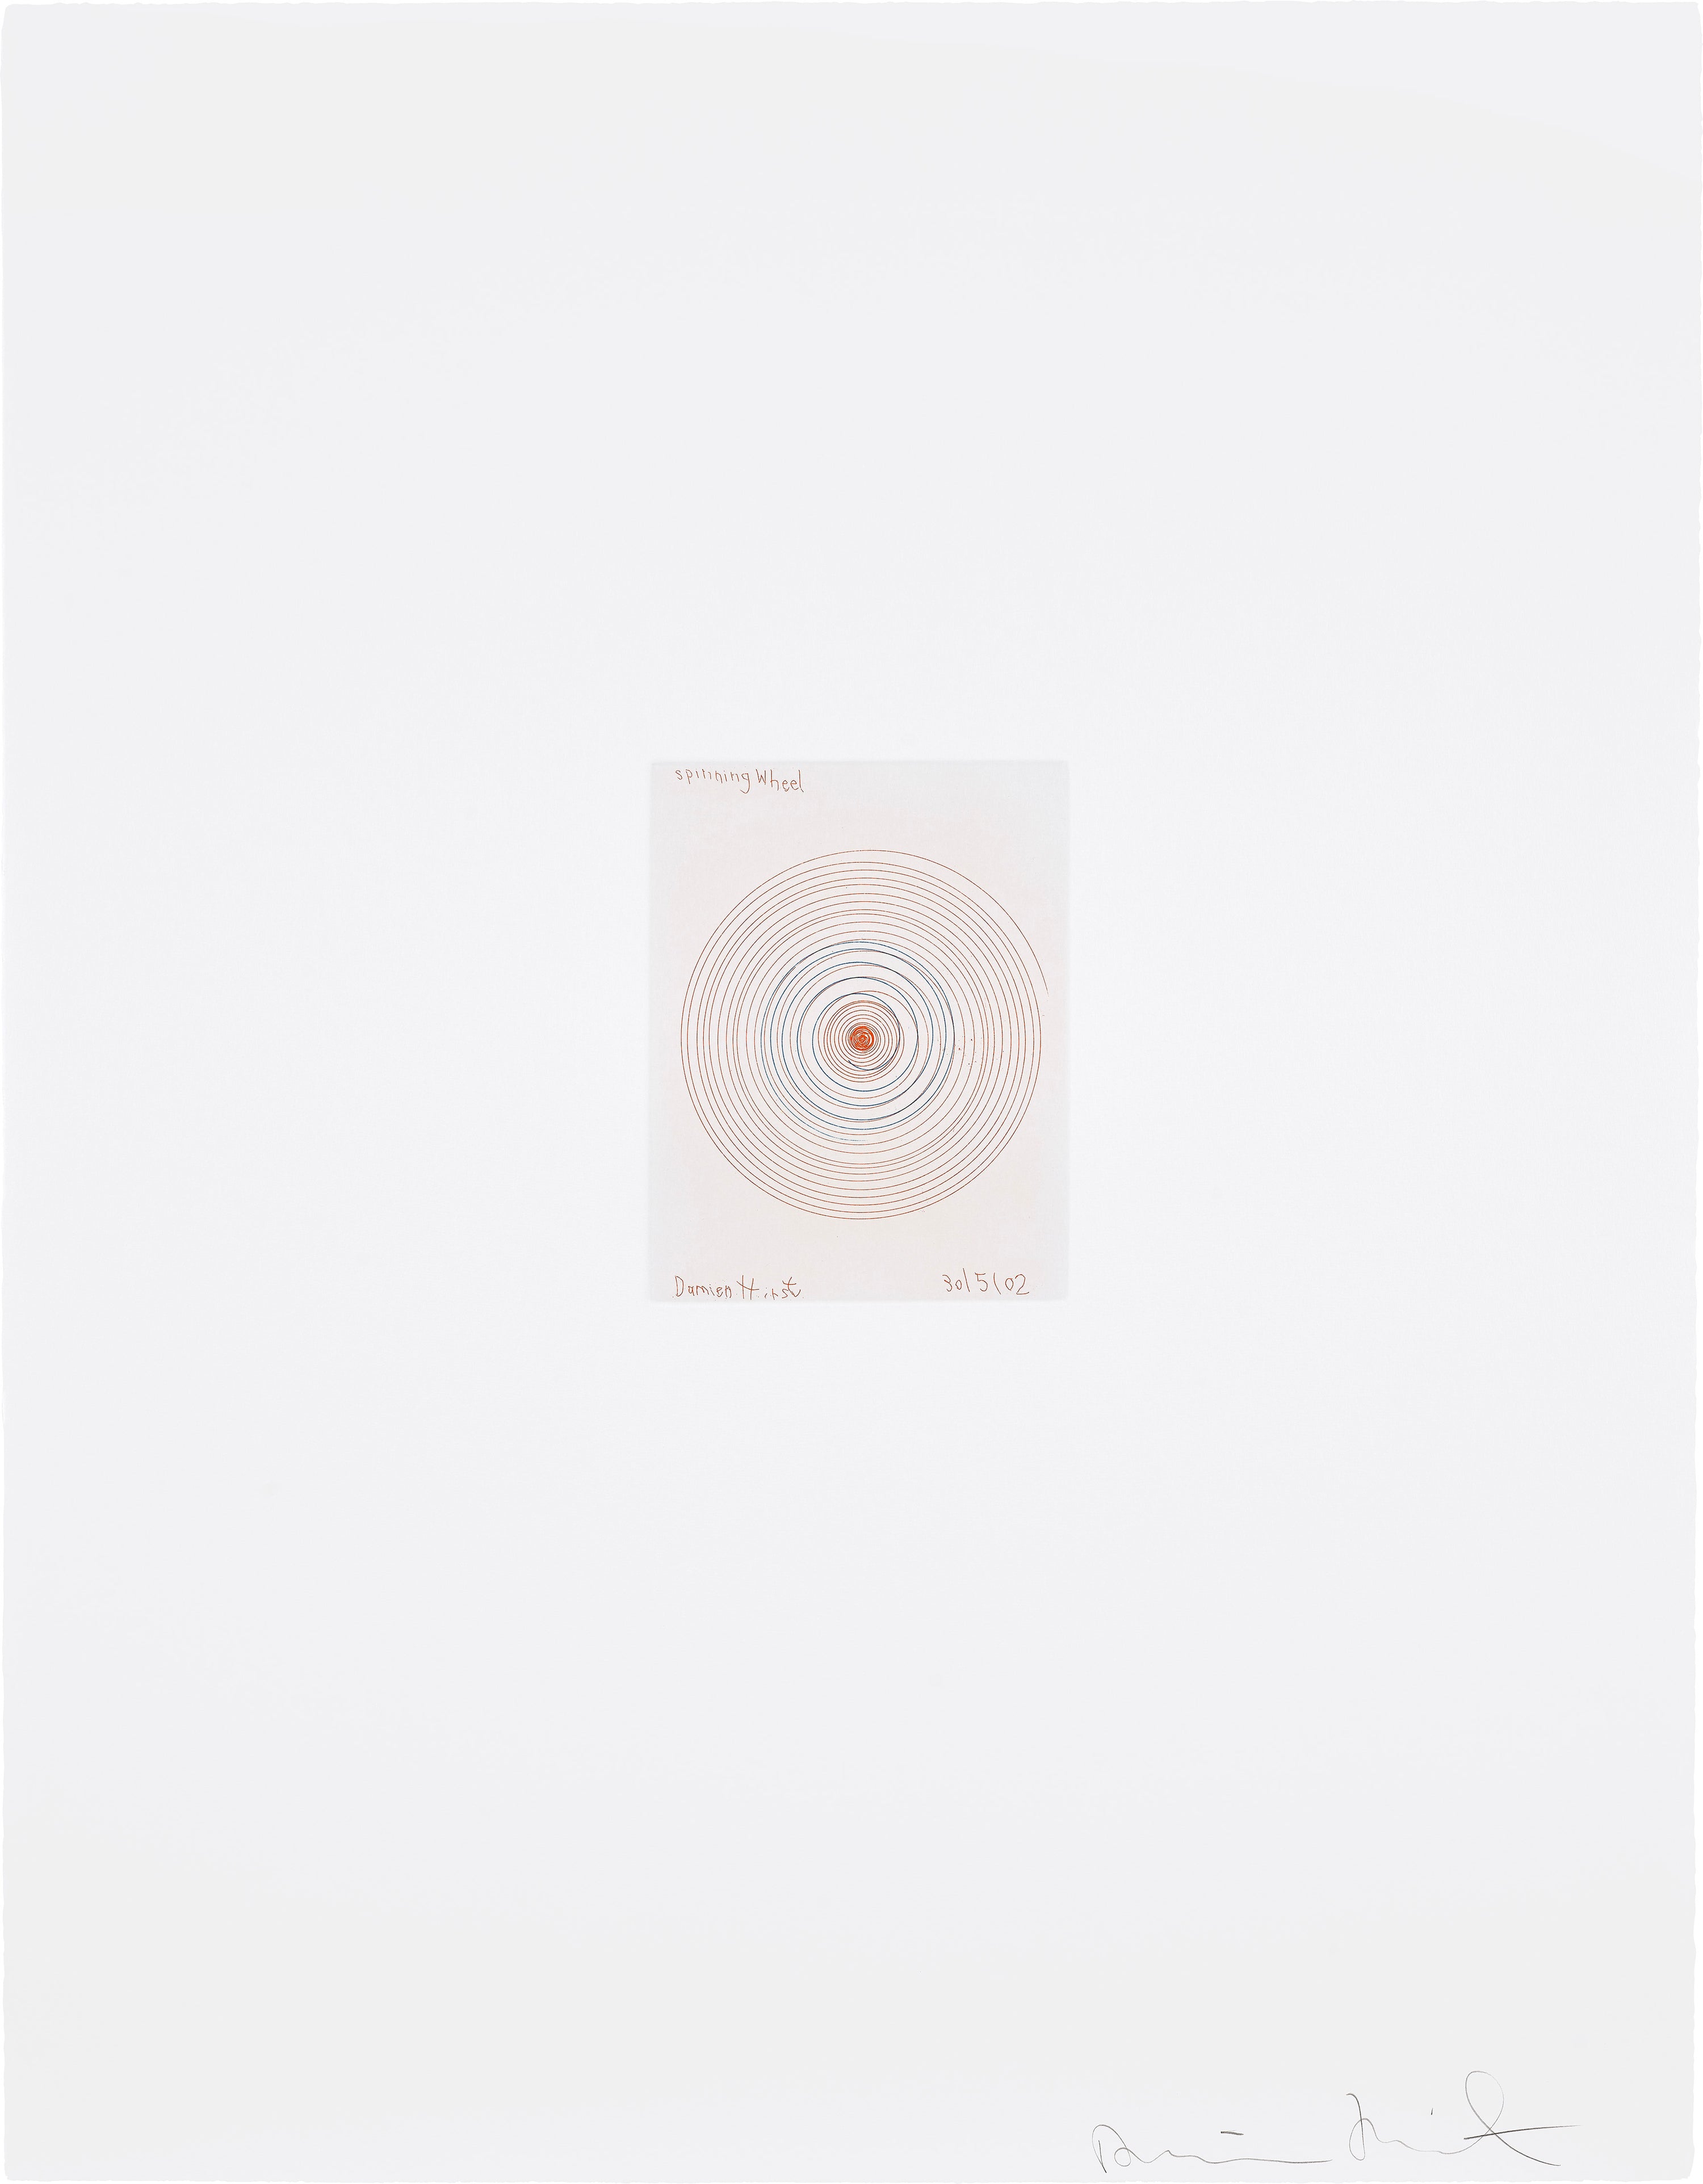 Spinning Wheel (In a Spin, the Action of the World on Things, Volume I), 2002